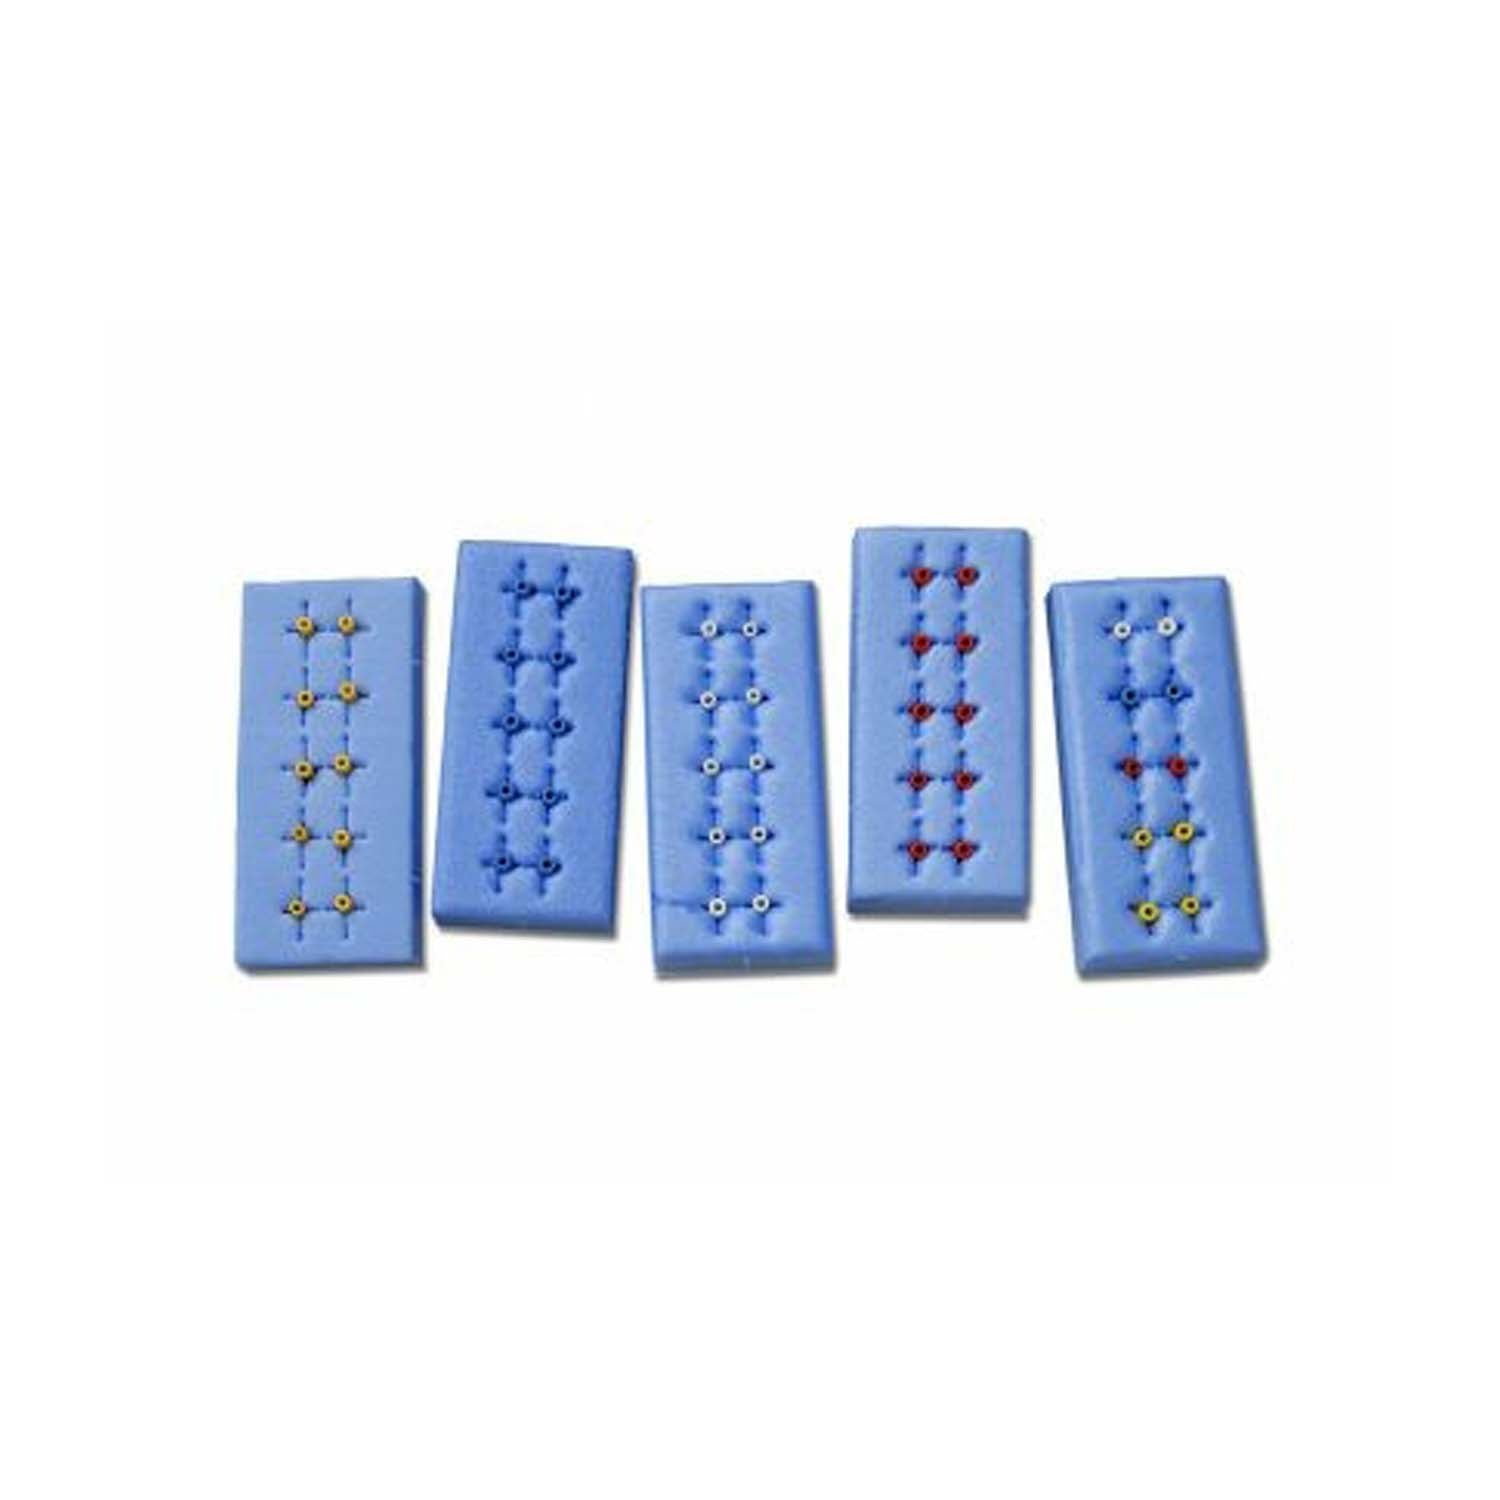 Sterion Suture Aid Booties | Standard | Assorted Colors | 5 Pairs per Tray | Pack of 5 Trays